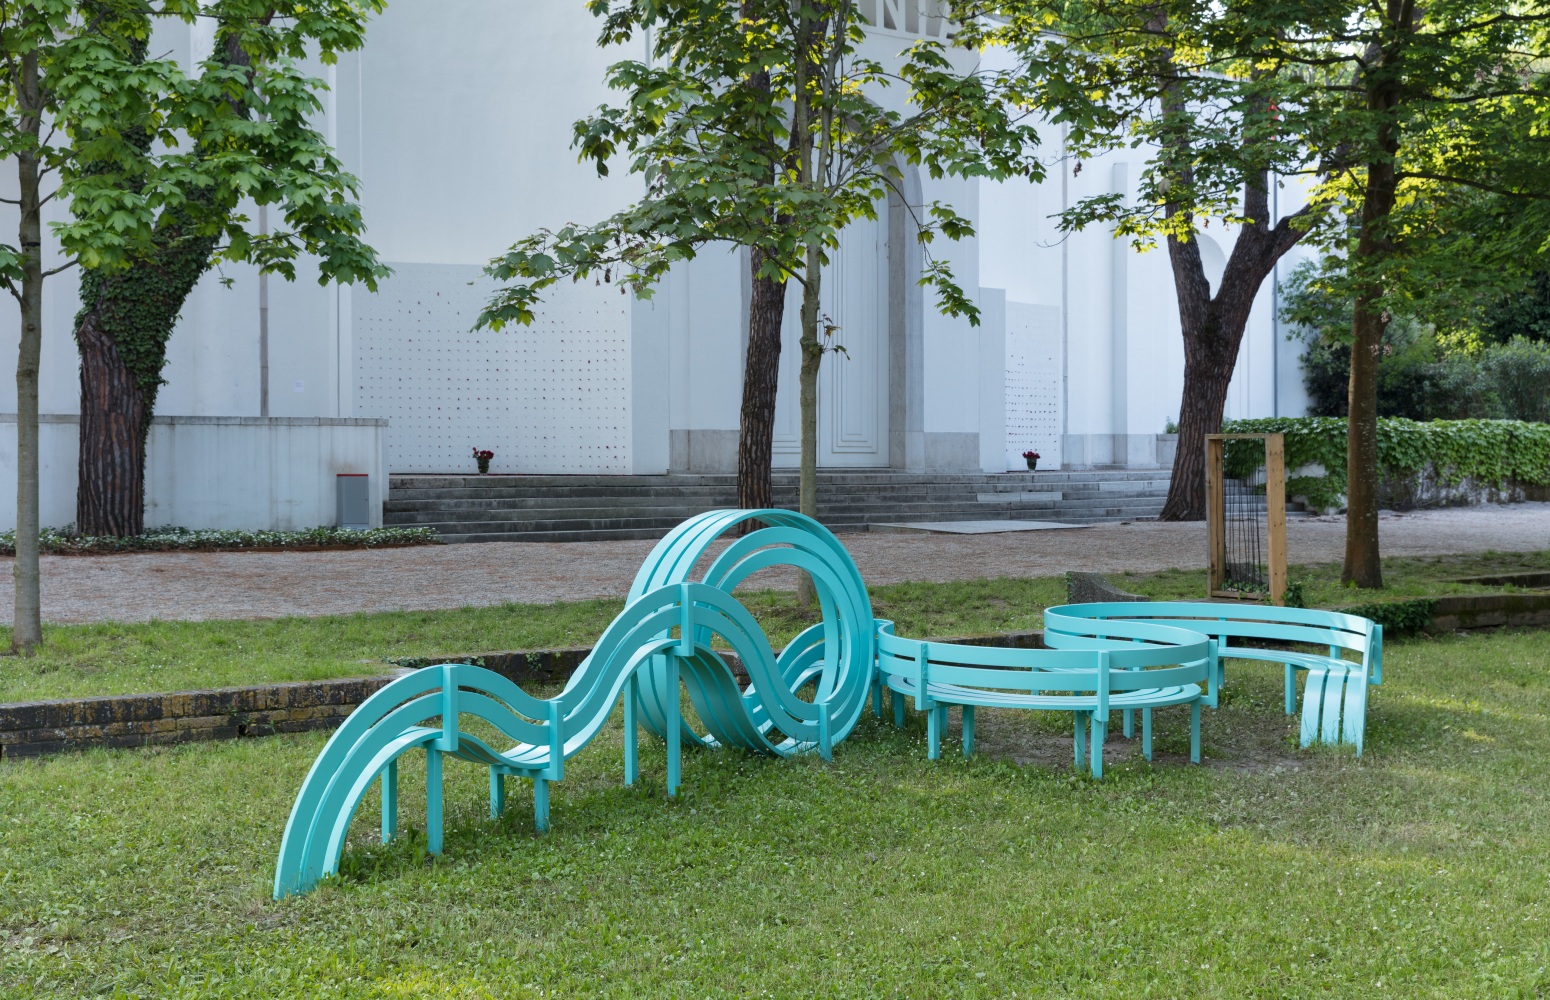 Jeppe Hein

Modified Social Bench for Venice #04

2019

Powder coated aluminum

59 1/2 x 308 5/8 x 132 5/8 inches (151 x 784 x 337 cm)

Edition&amp;nbsp;of 3, with 2 AP

JH 520